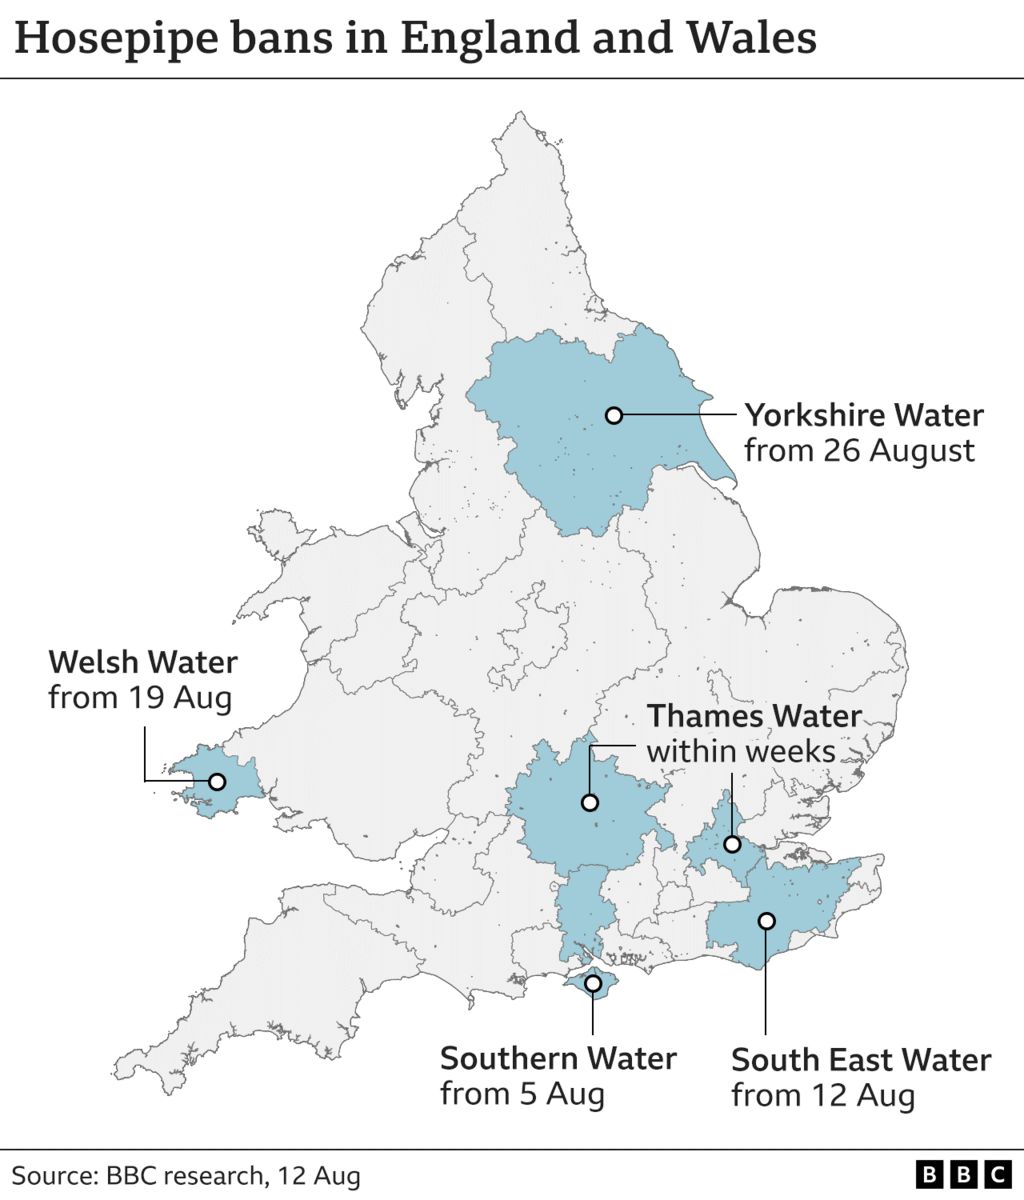 Map showing areas with hosepipe bans